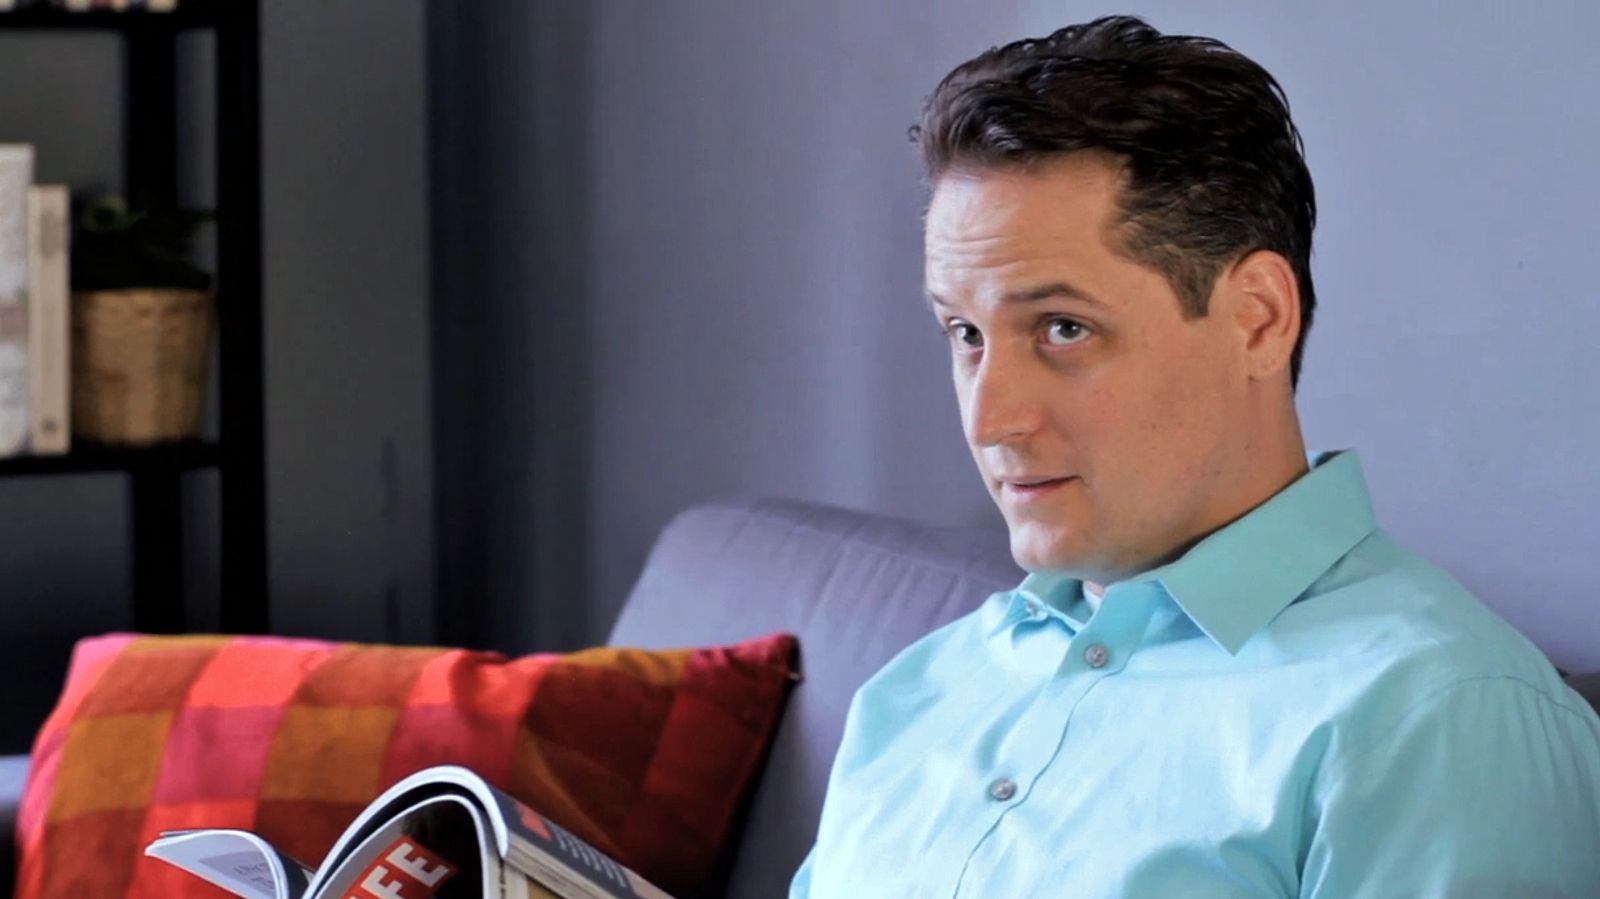 Nick Baker playing a concerned father in an independent pilot.